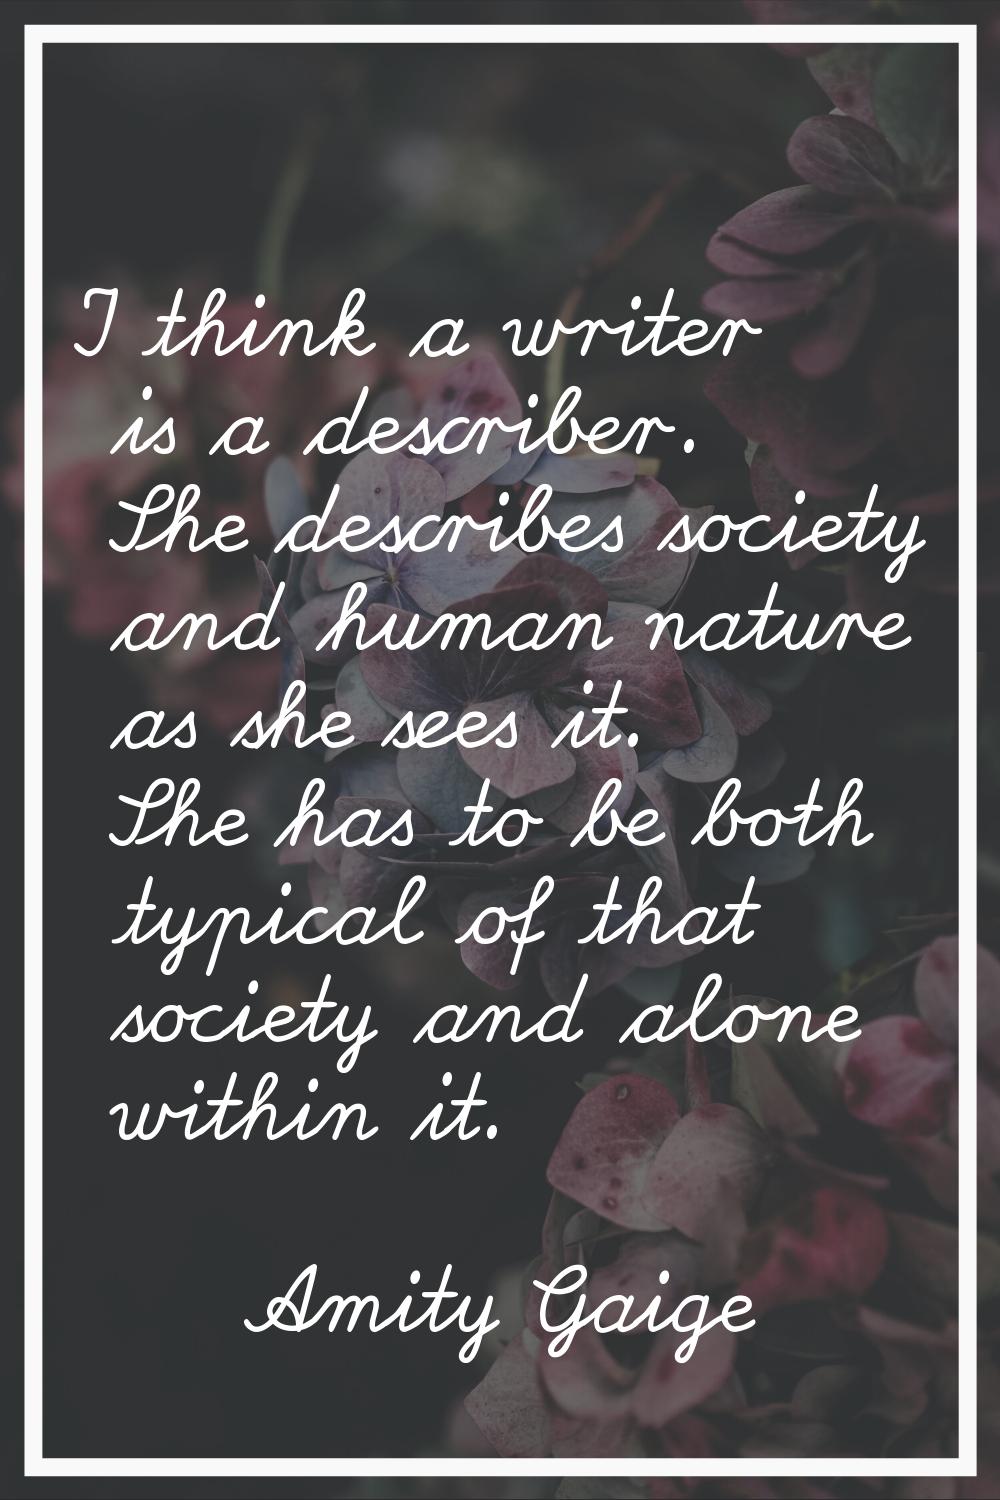 I think a writer is a describer. She describes society and human nature as she sees it. She has to 